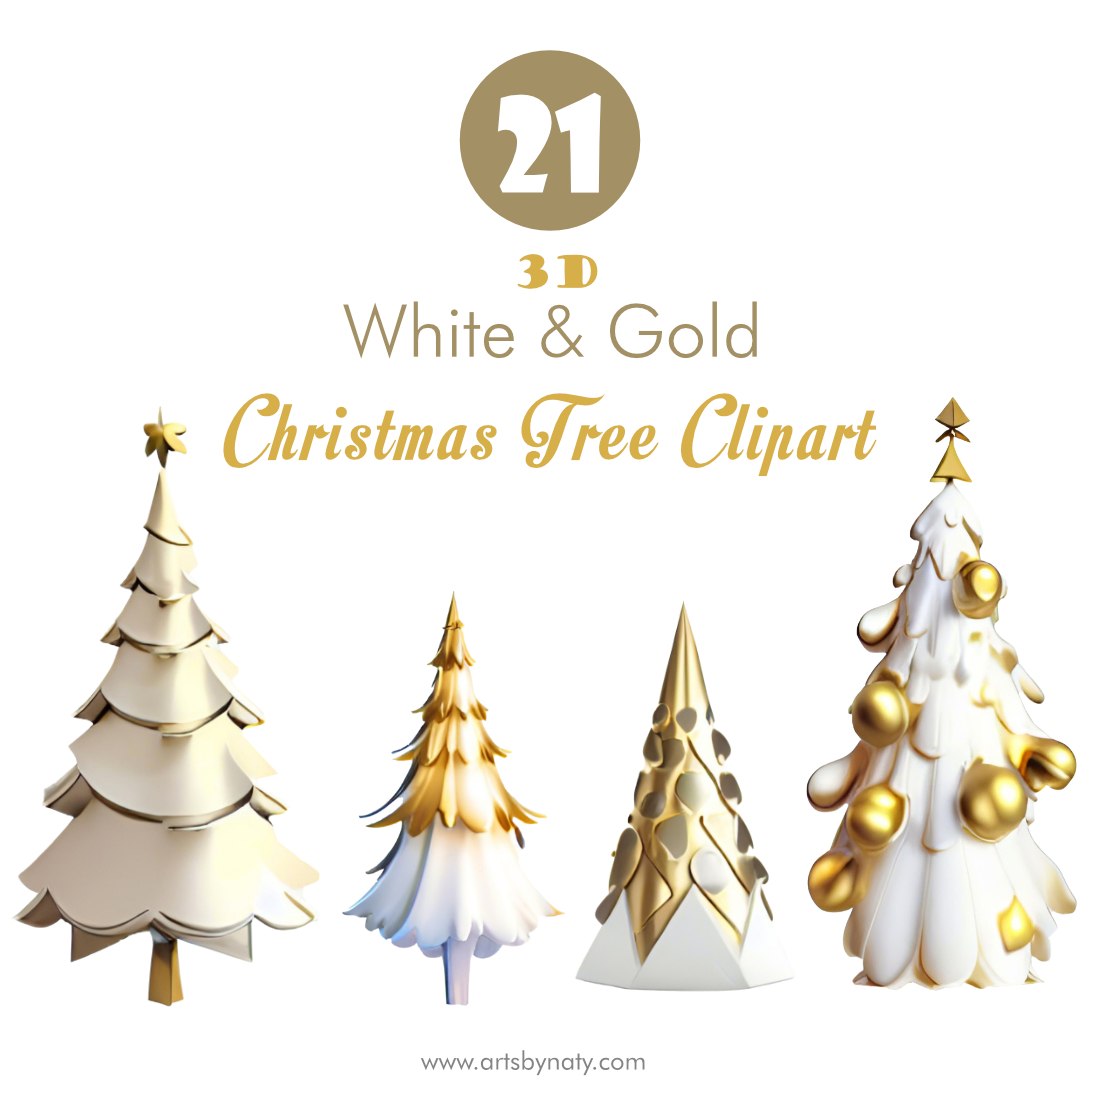 3D White and Gold Christmas Tree Clipart Bundle cover image.